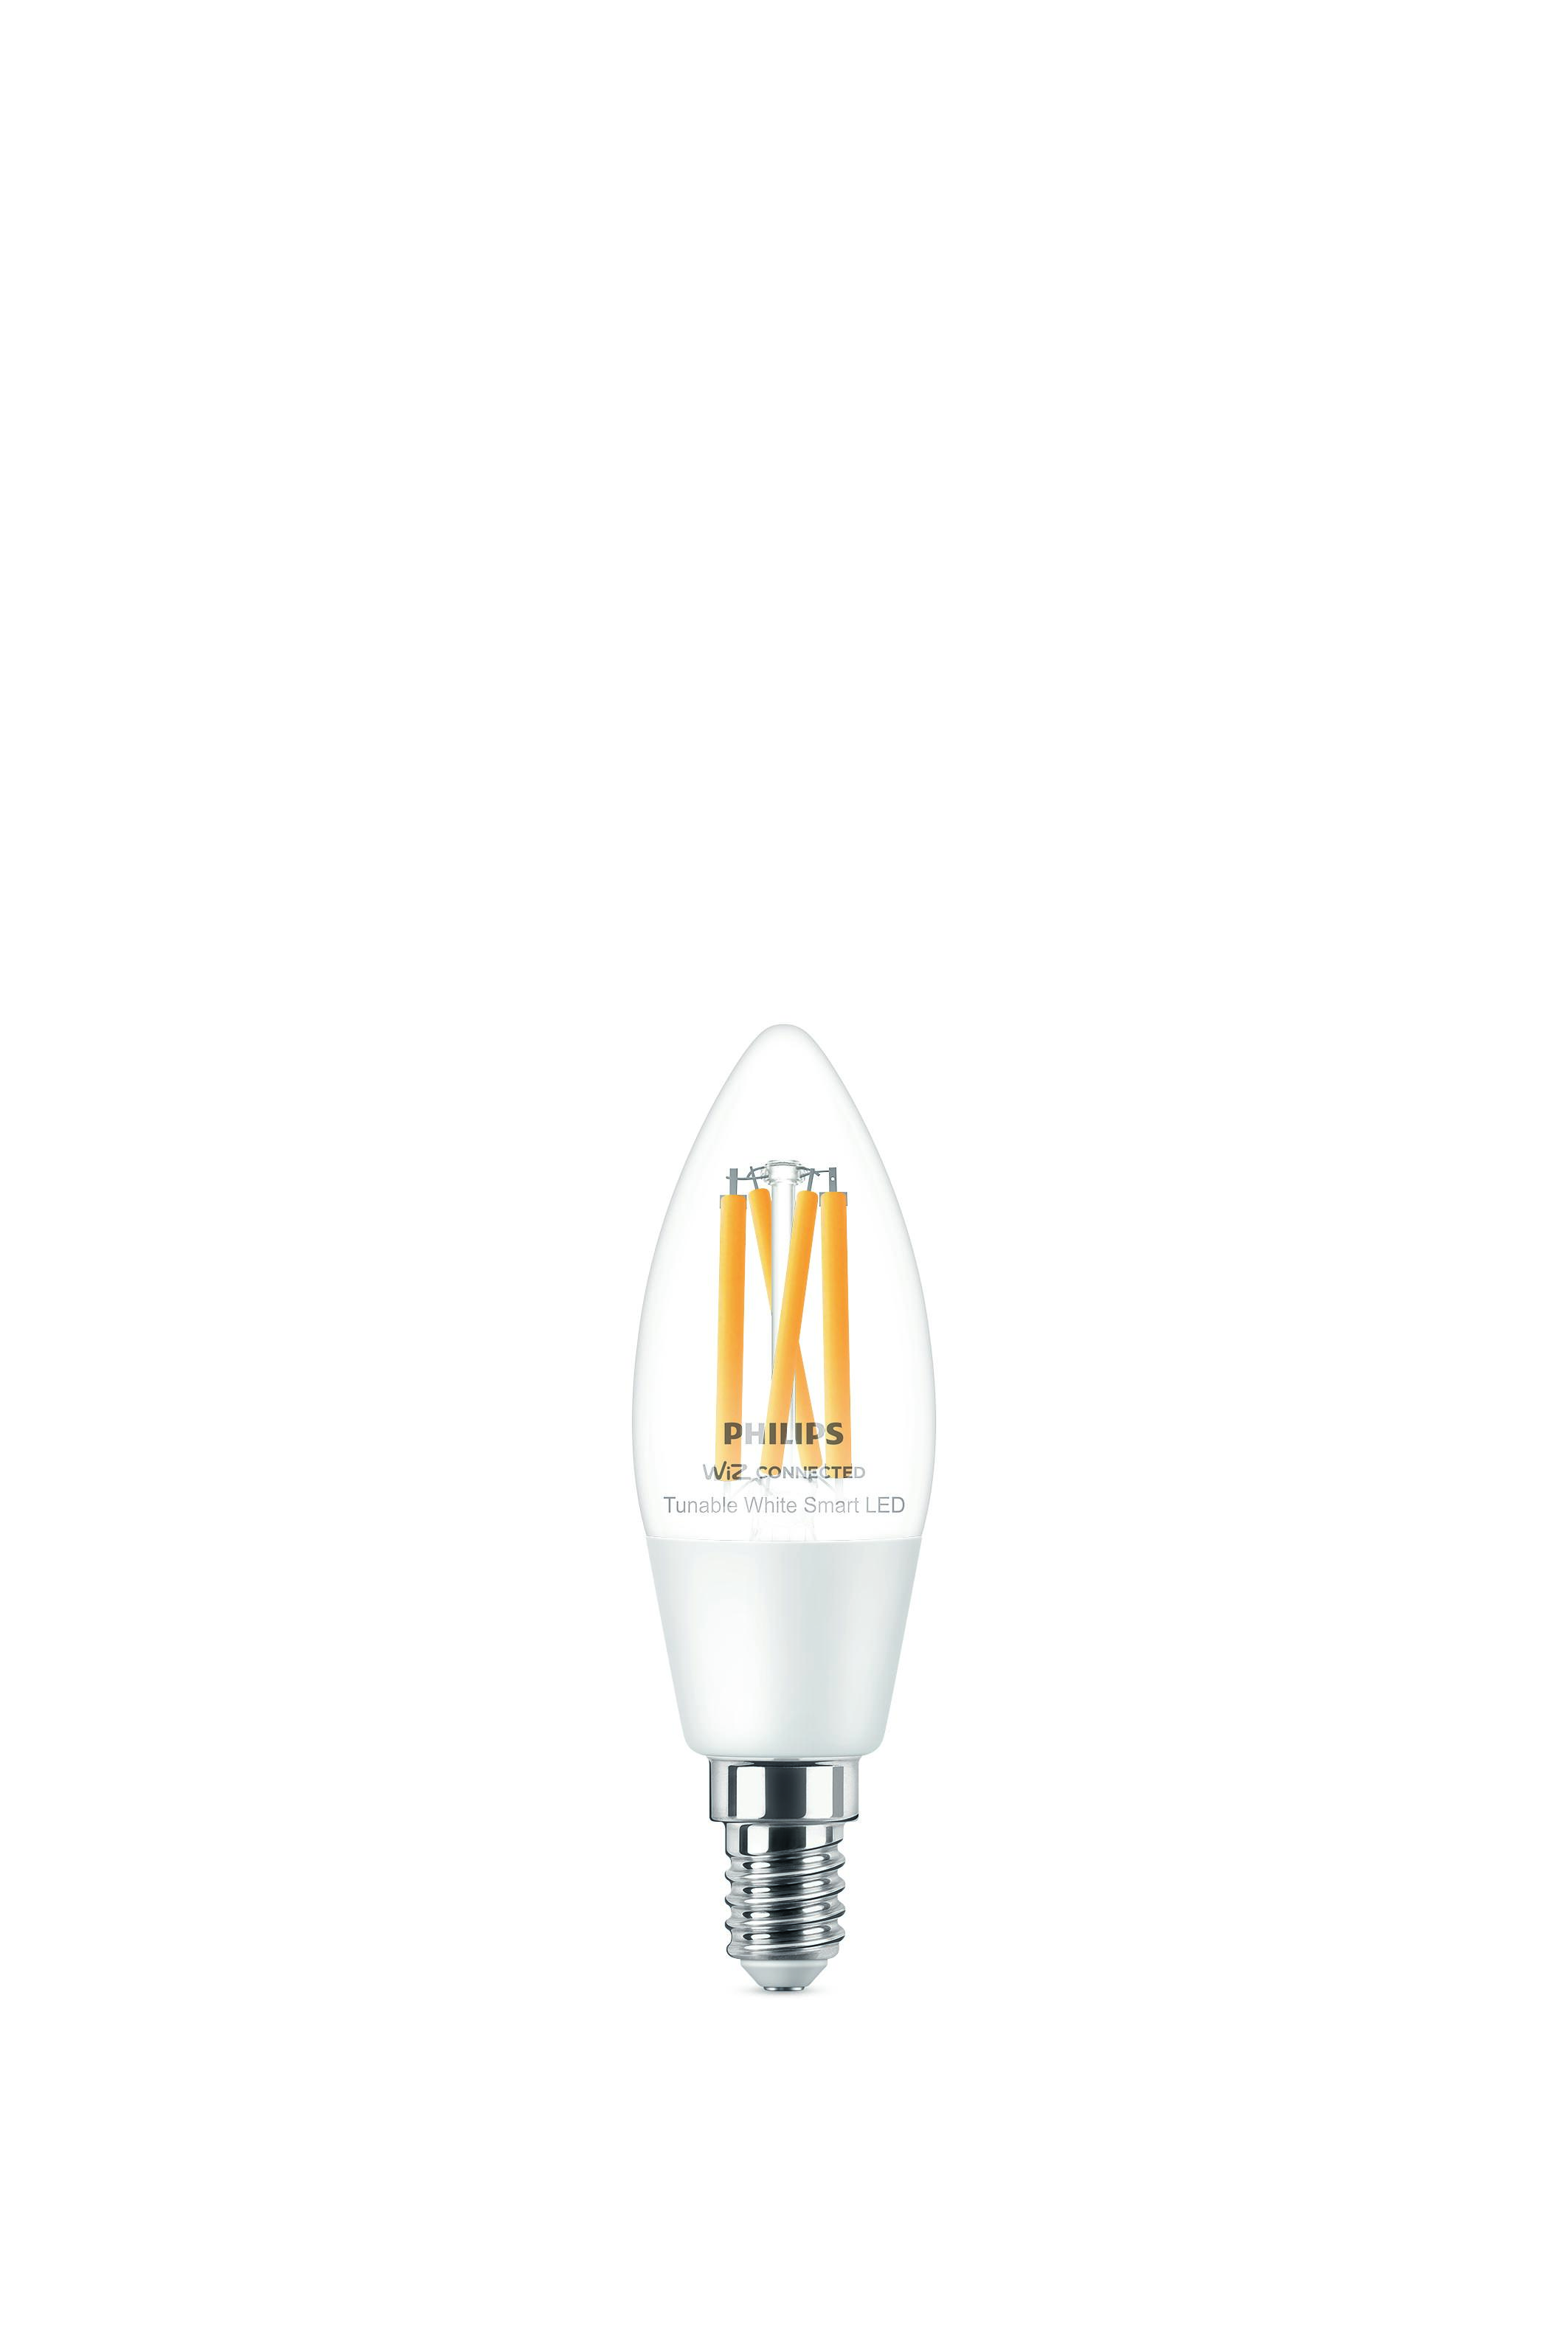 PHILIPS Smart LED E14, WiZ connected, 4,9 W, 470 lm, klar, dimmbar